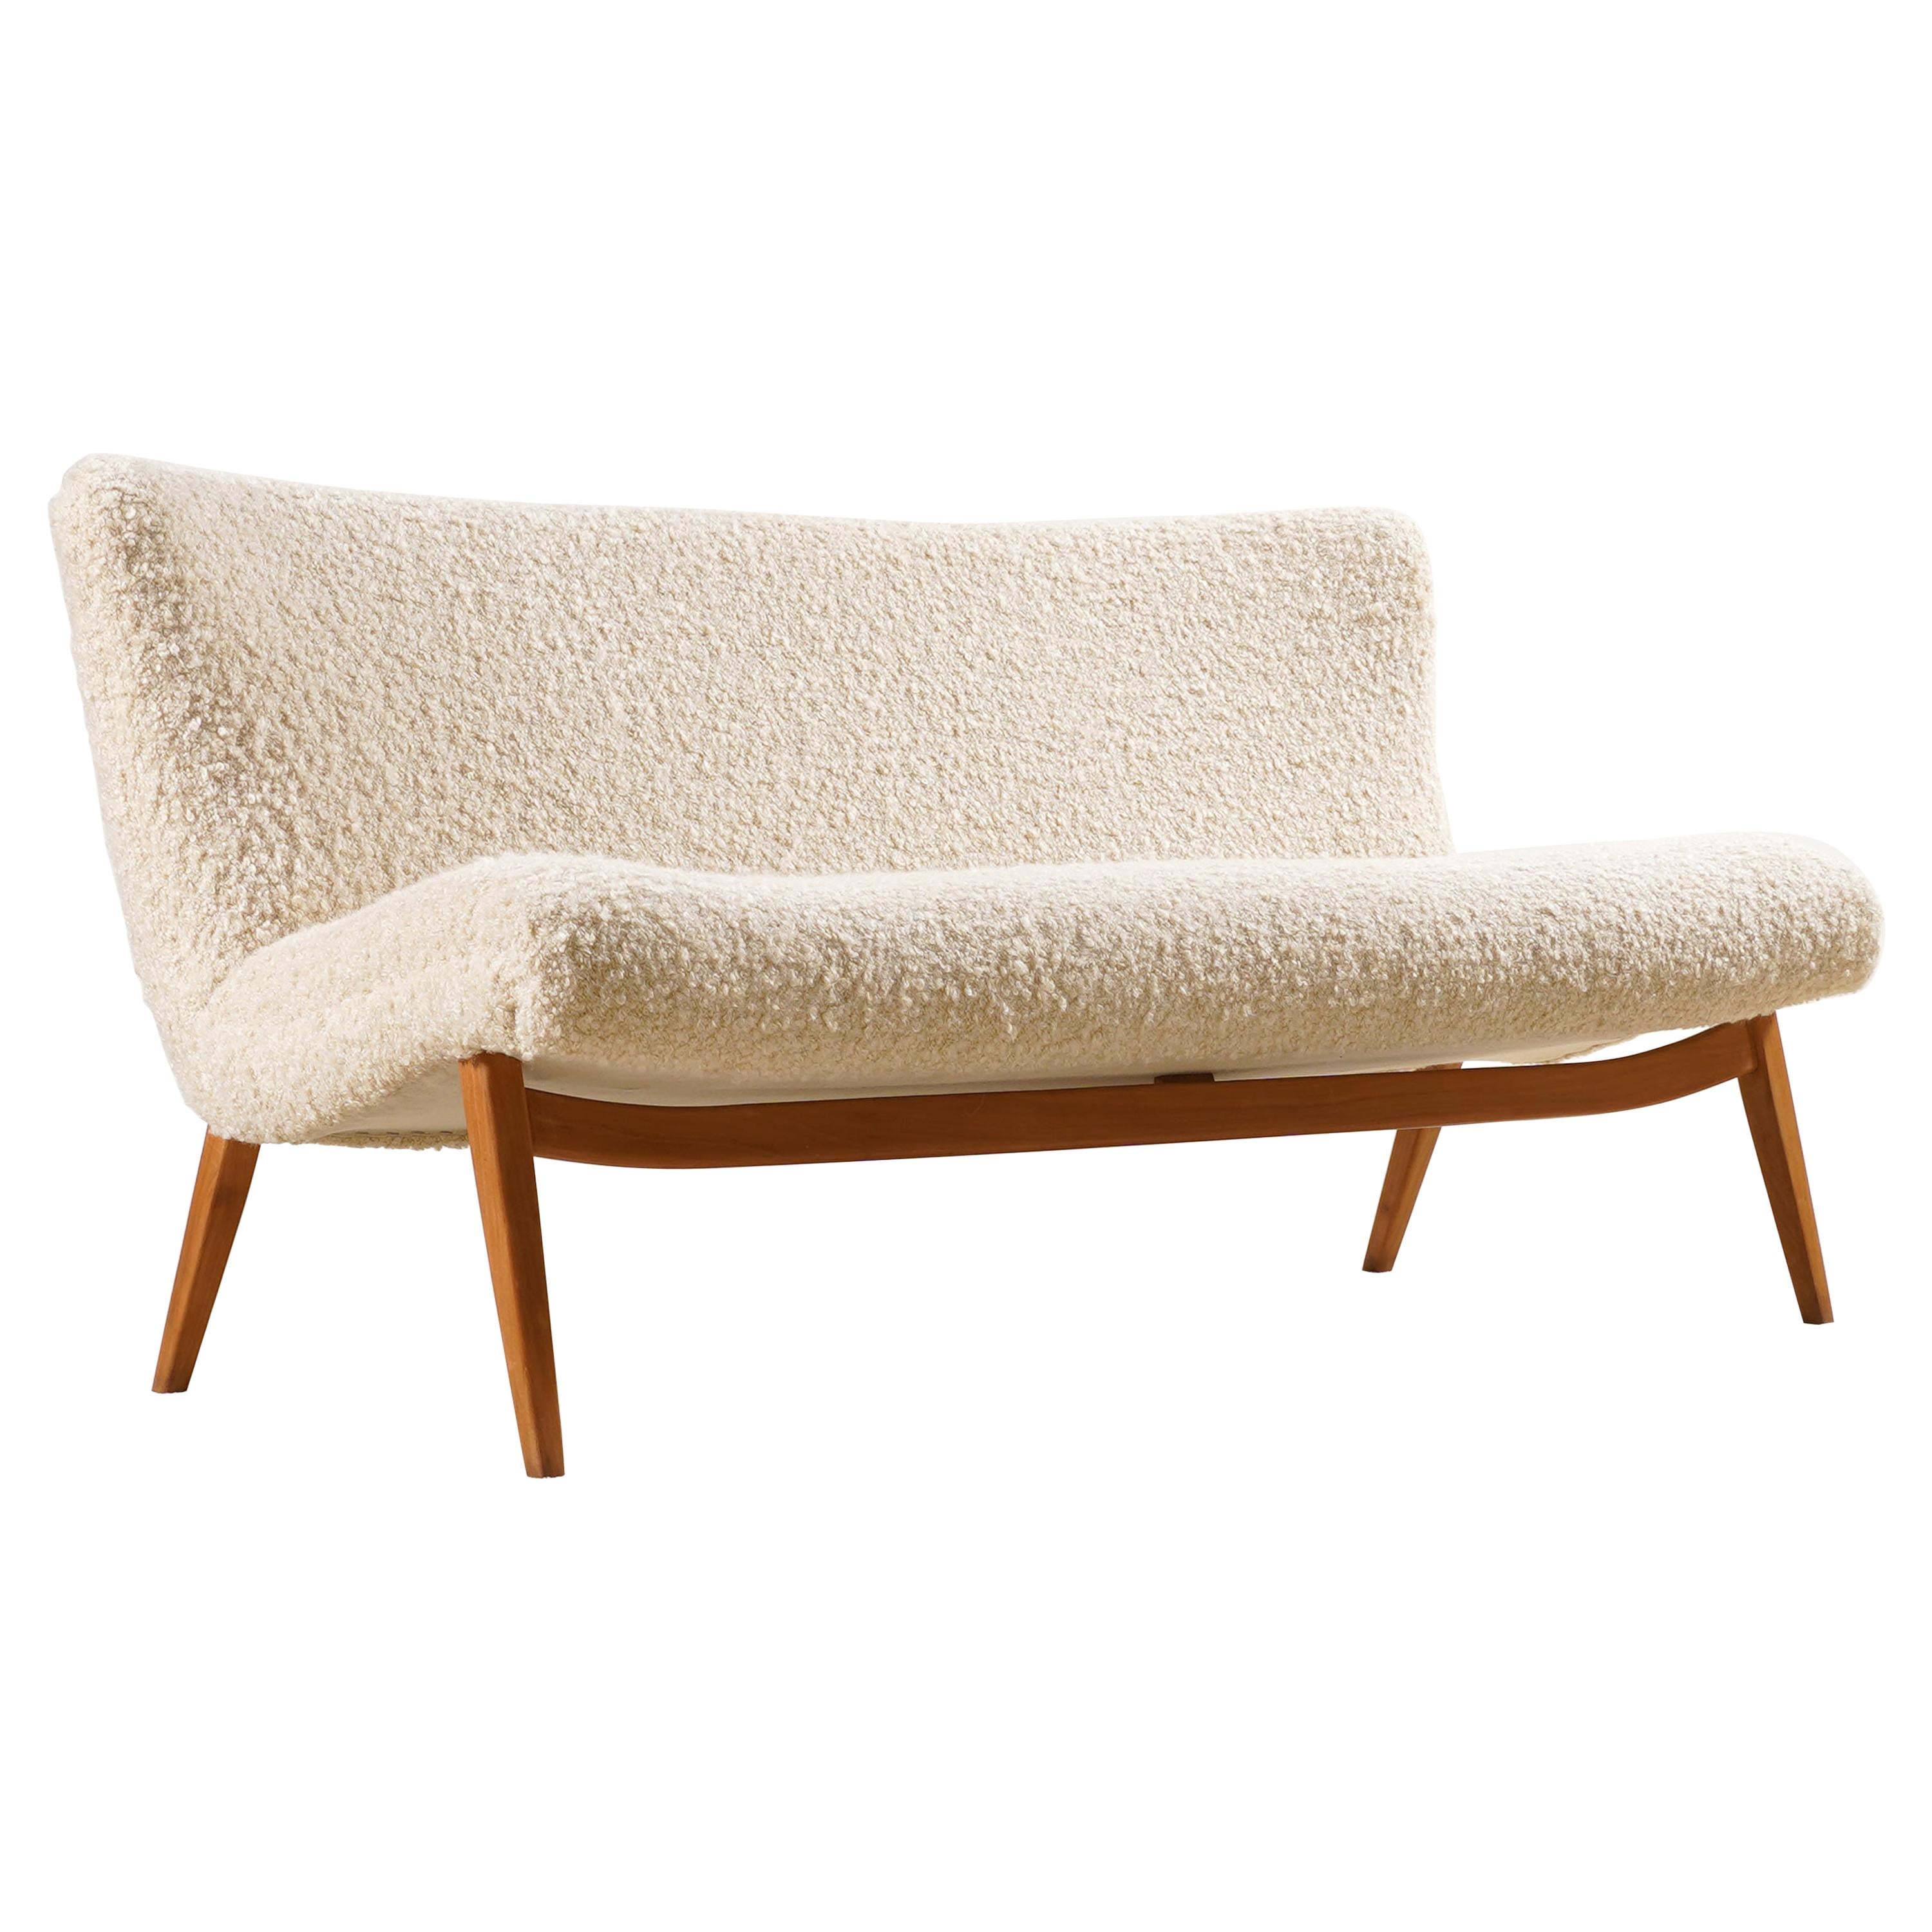 Two-Seat Danish Sofa, Original Piece from the 1950s Newly Upholstered